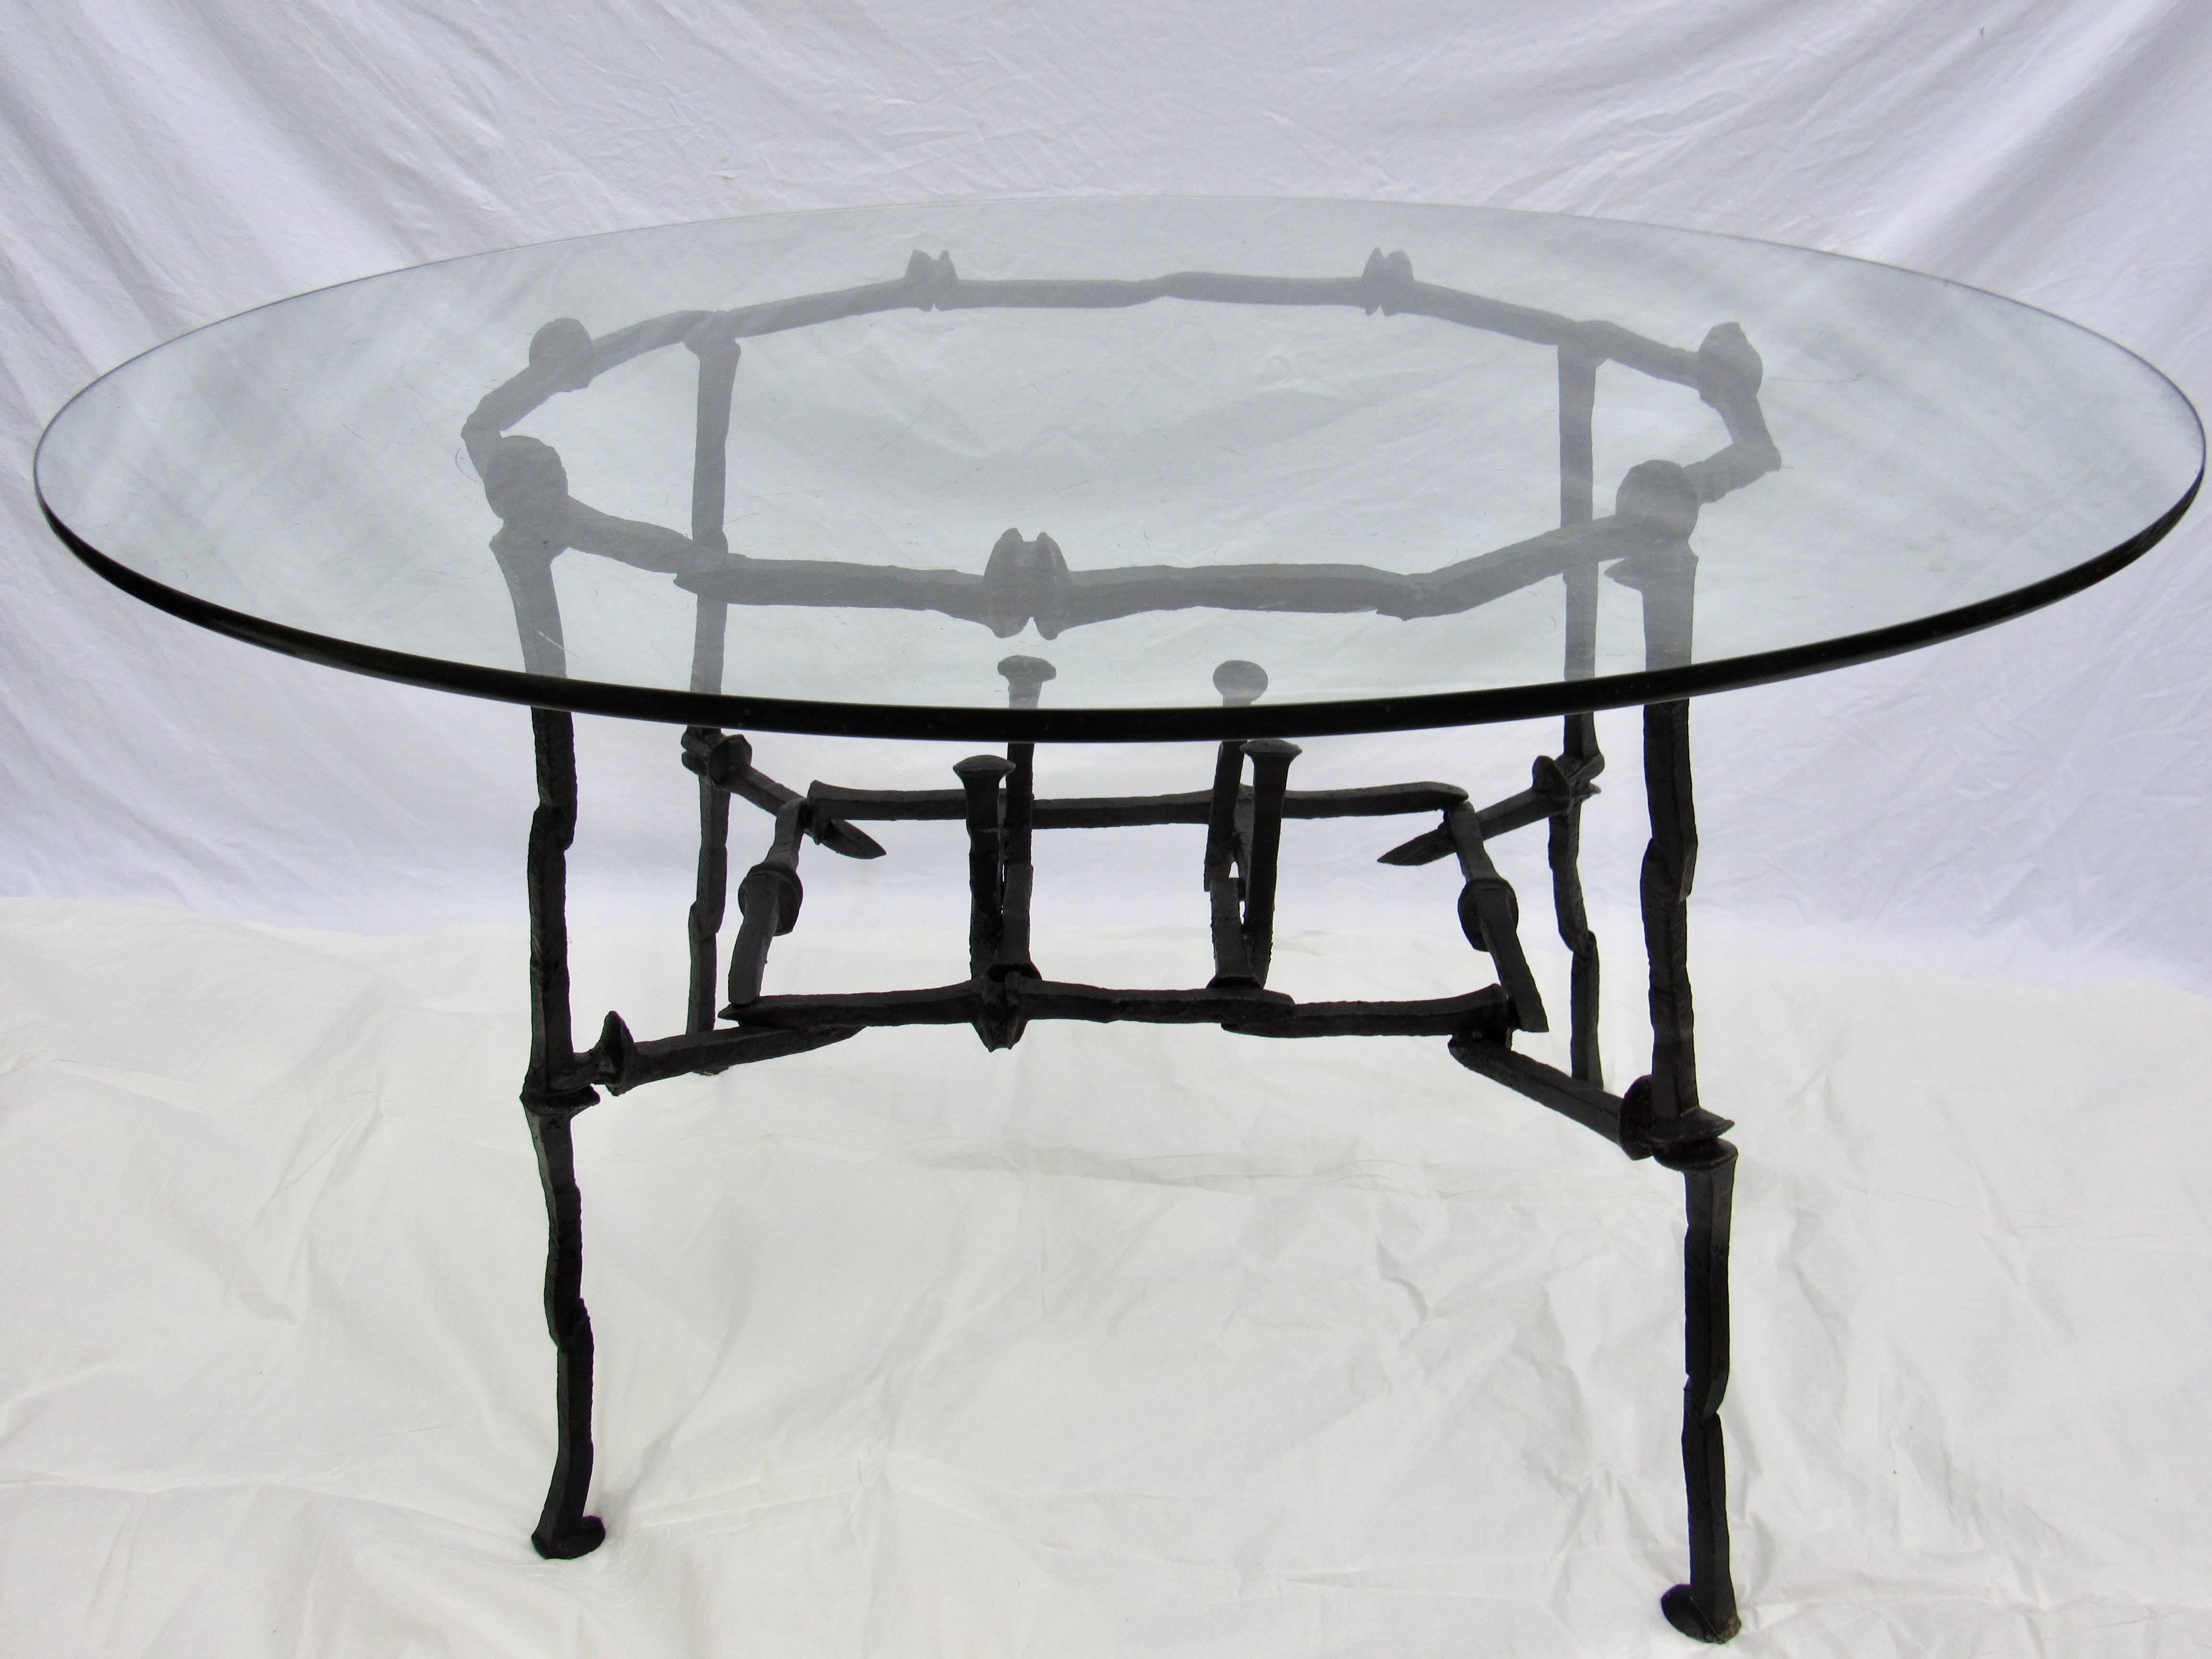 Studio created welded RR spike breakfast or center table shown with a 42 inch diameter glass 3/8 inch thick. The legs of the frame are within 36 inch in diameter and the upper ring of the table frame is 32 inch in diameter.
The table is in excellent